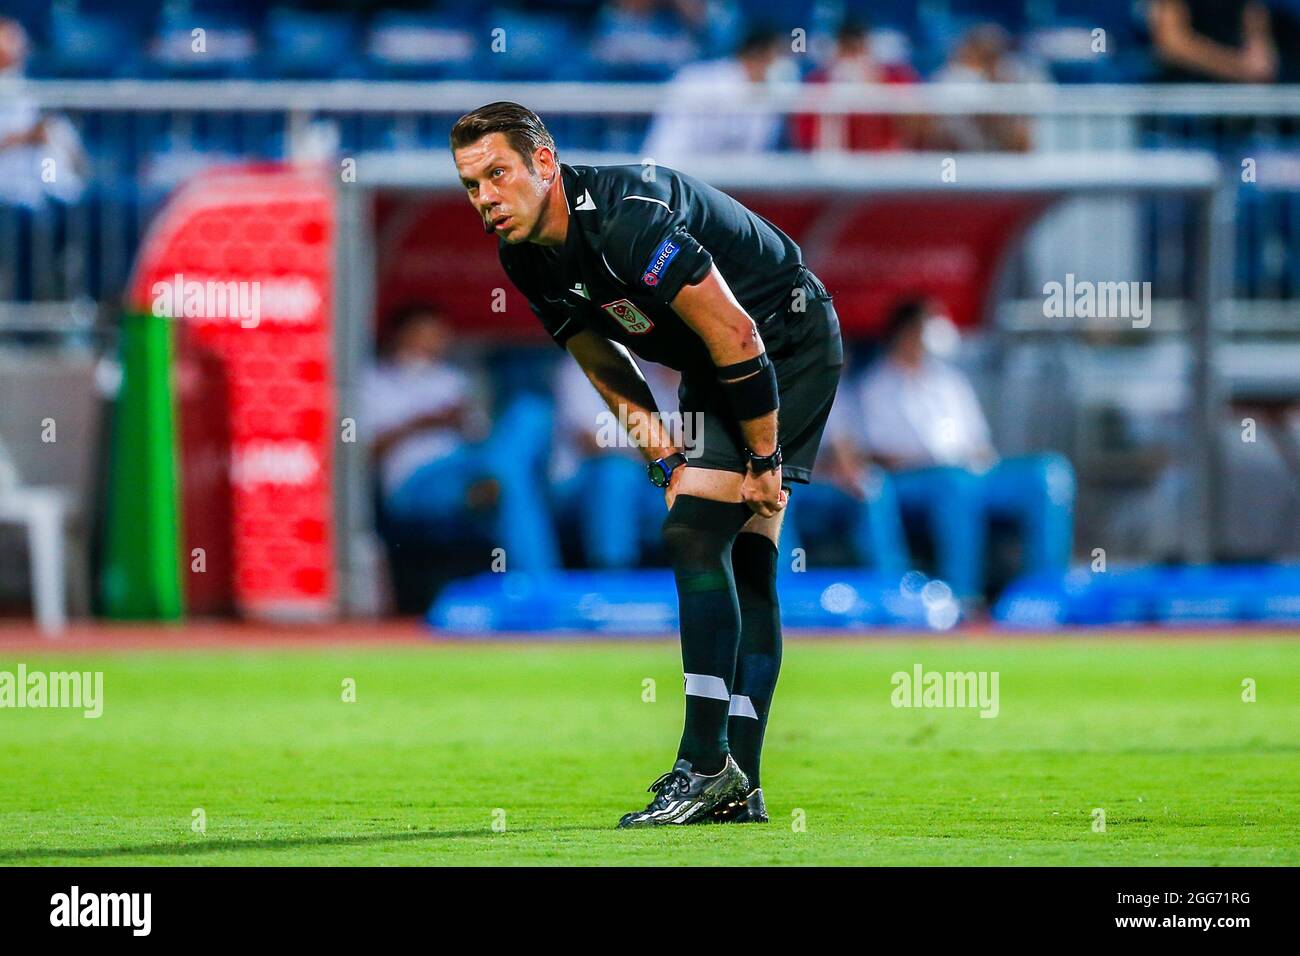 ISTANBUL, TURKEY - AUGUST 29: referee Firat Aydinus during the Super Lig match between Kasimpasa and Galatasaray at Recep Tayyip Erdogan Stadium on August 29, 2021 in Istanbul, Turkey (Photo by /Orange Pictures) Stock Photo